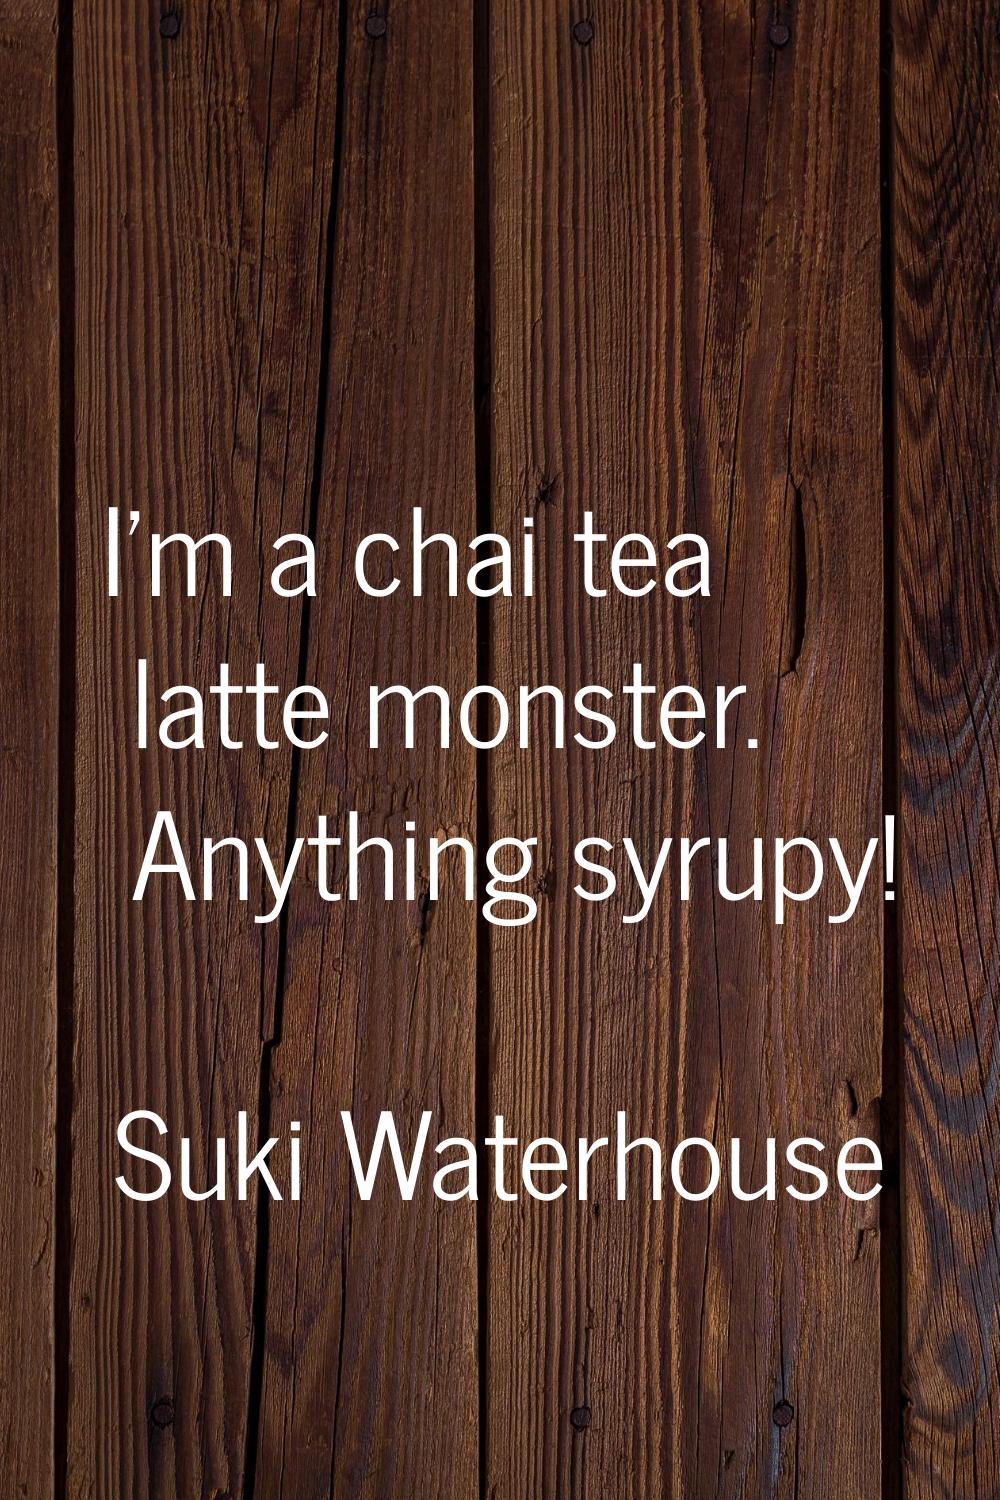 I'm a chai tea latte monster. Anything syrupy!